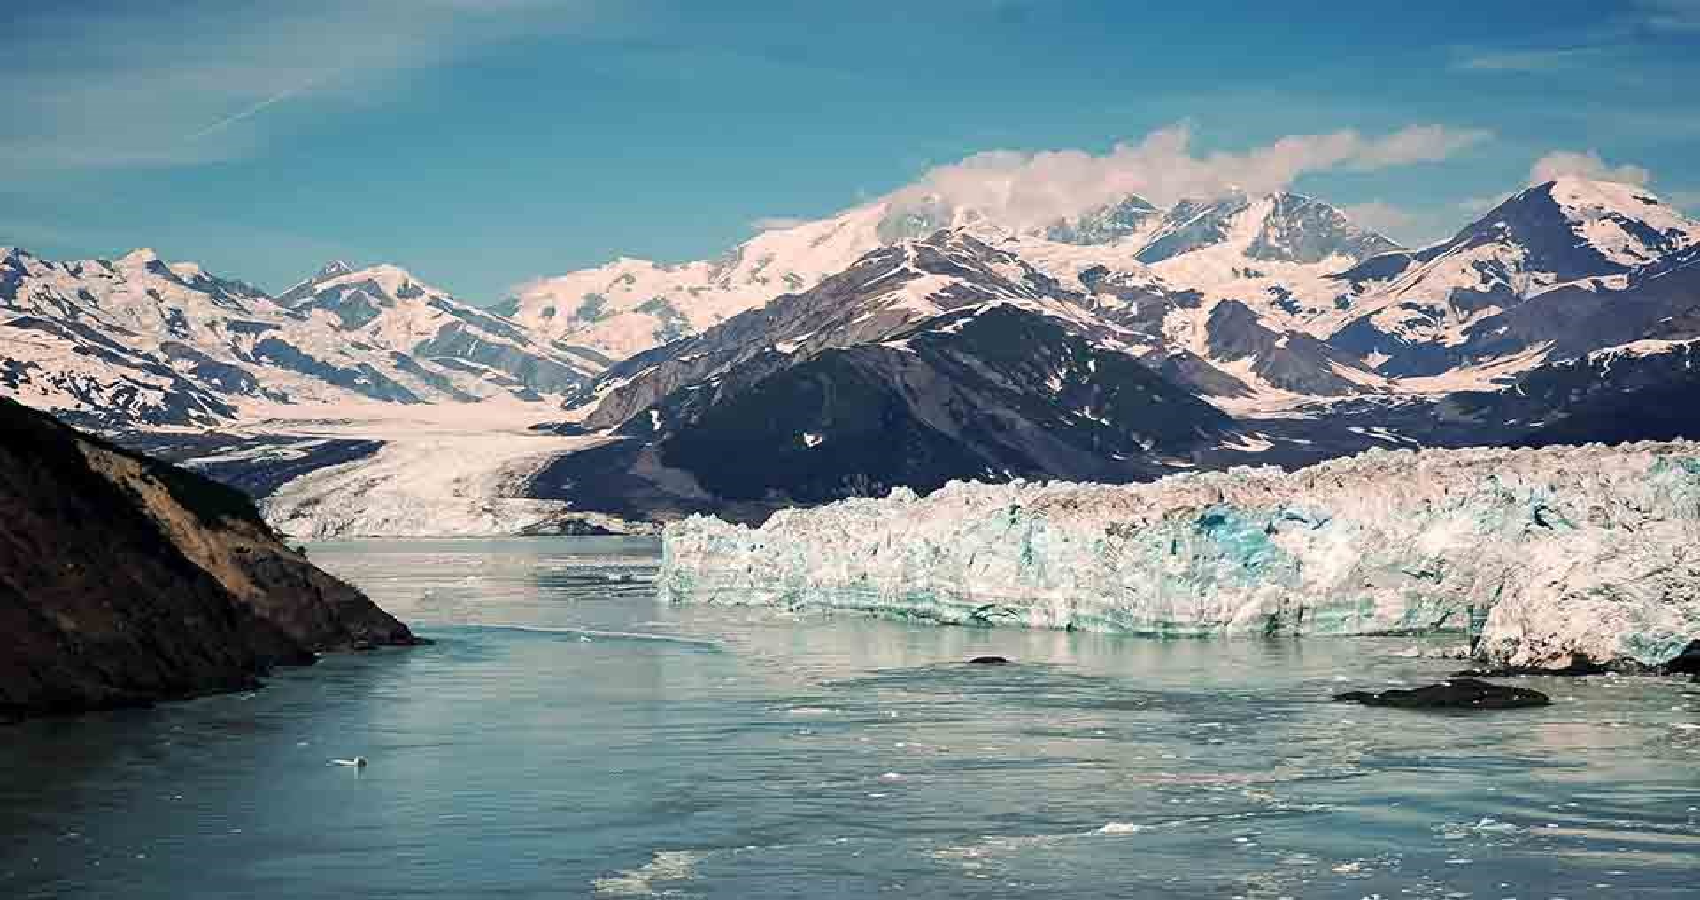 Catastrophic Sea-Level Rise from Antarctic Melting is Possible with Severe Global Warming